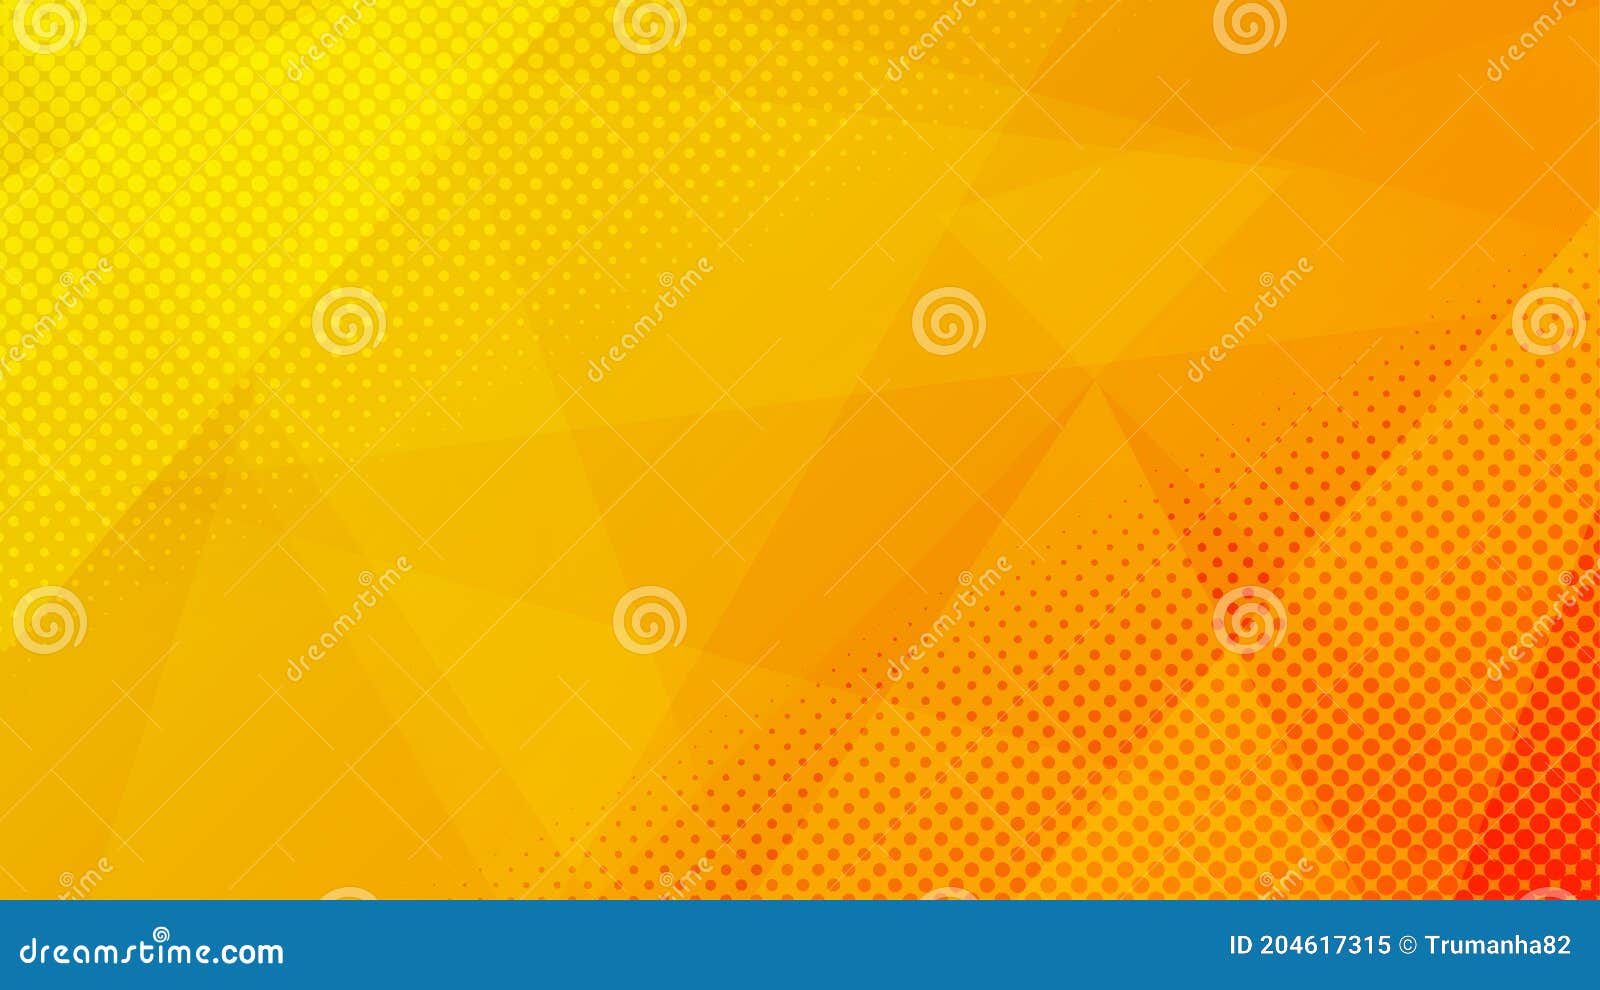 abstract  orange and yellow gradient background with polygons and halftone dots pattern